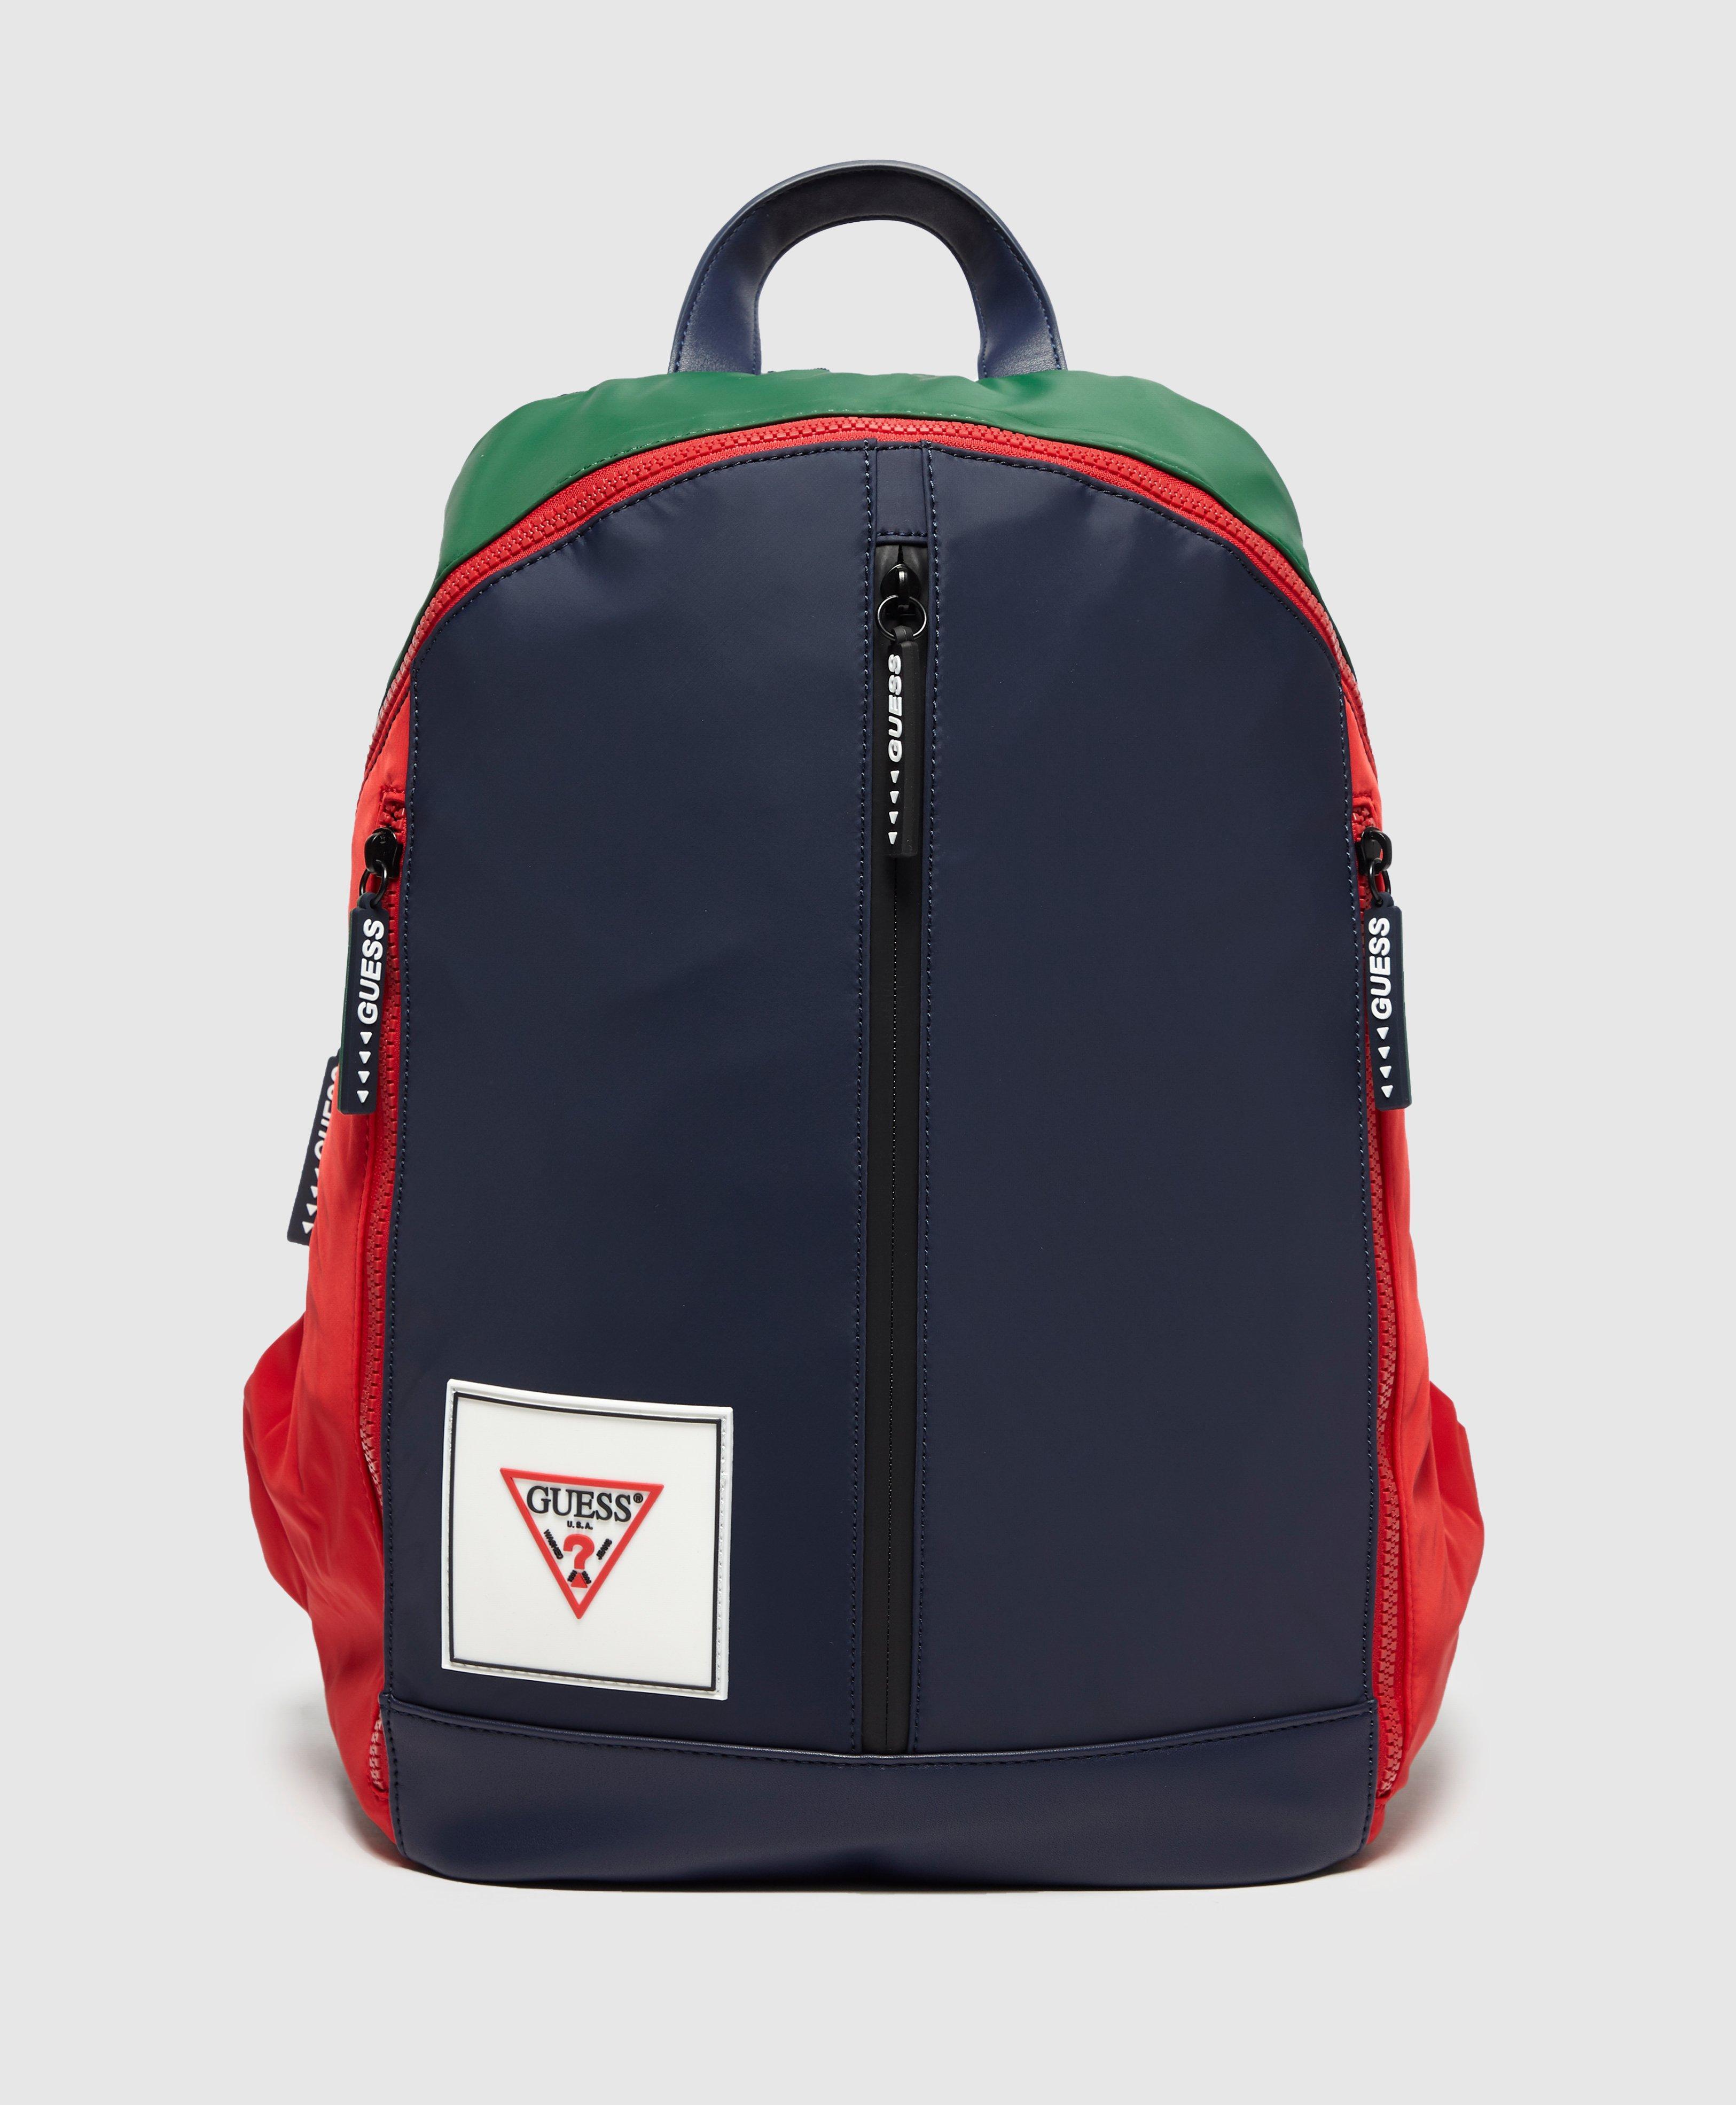 Guess Colour Block Backpack in Blue for Men - Lyst